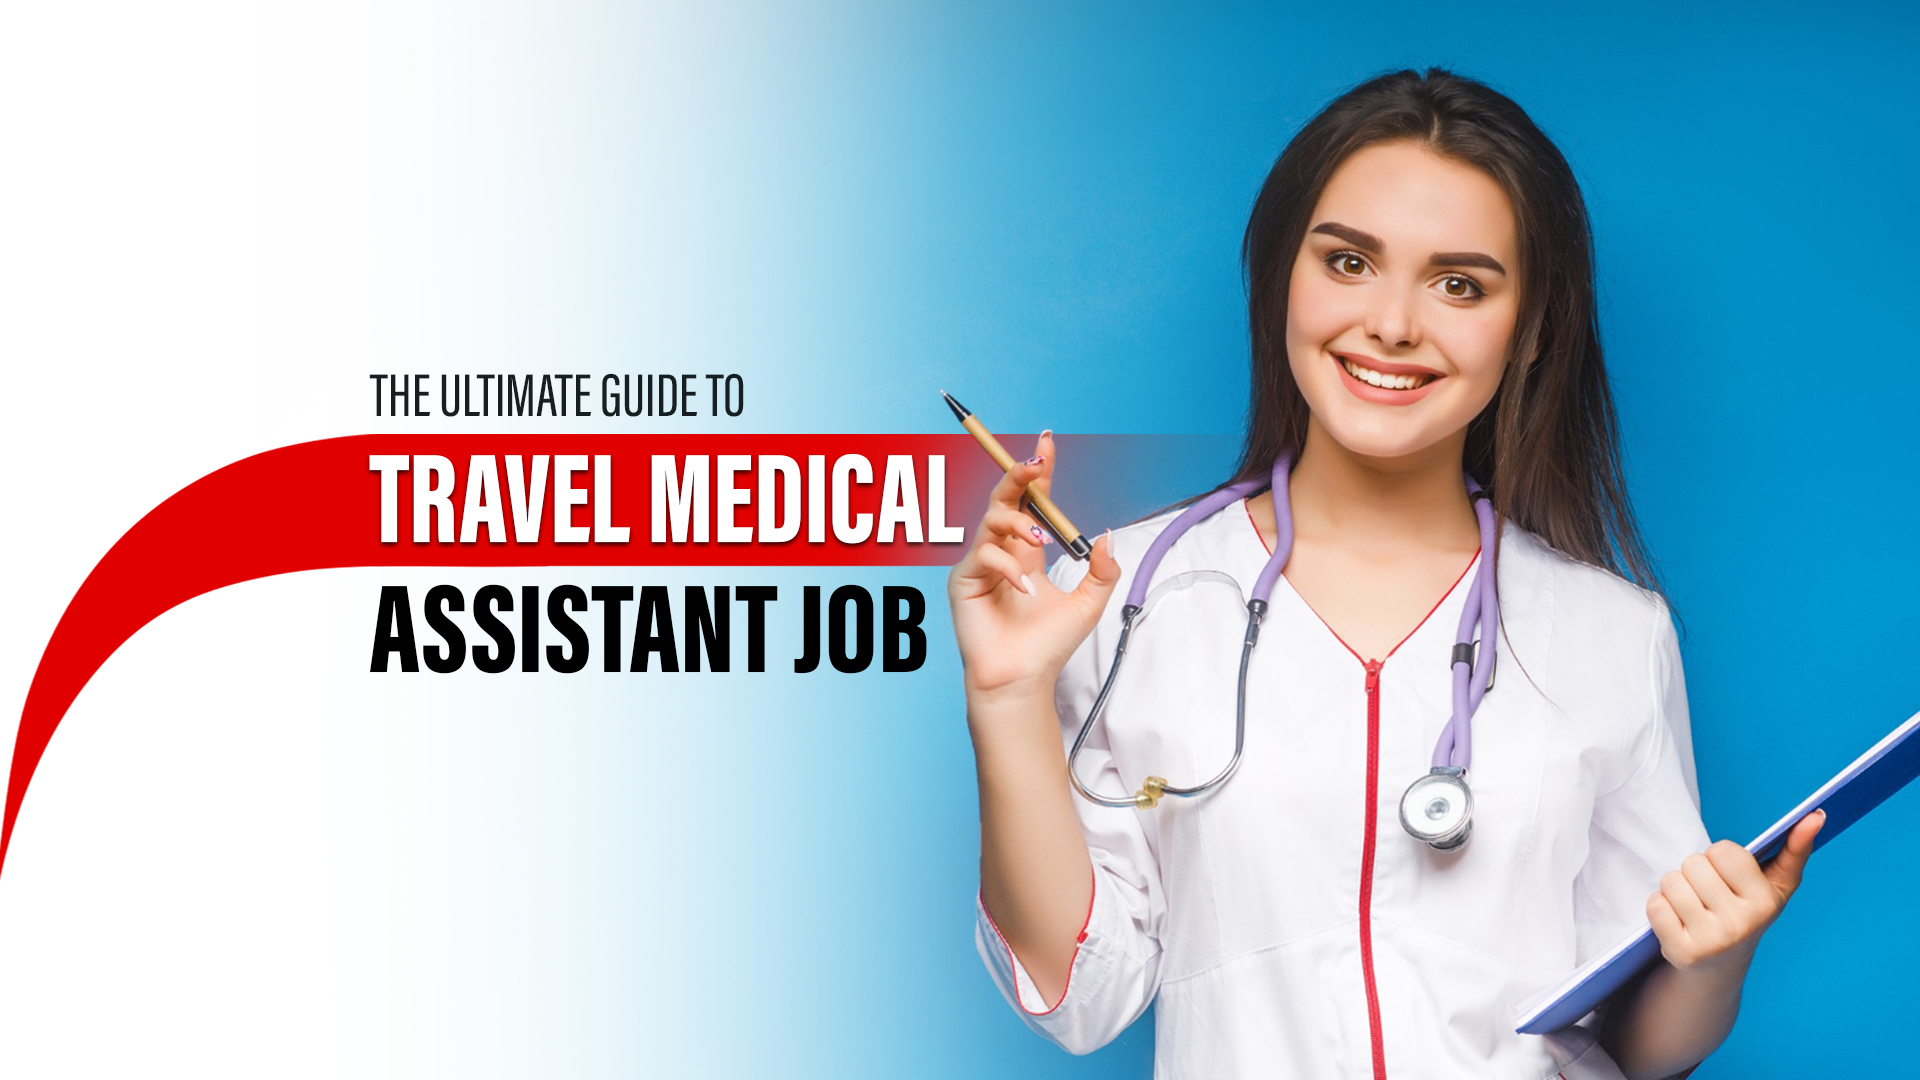 How to Get Your Dream Travel Medical Assistant Job: Top Tips & Resources Explained